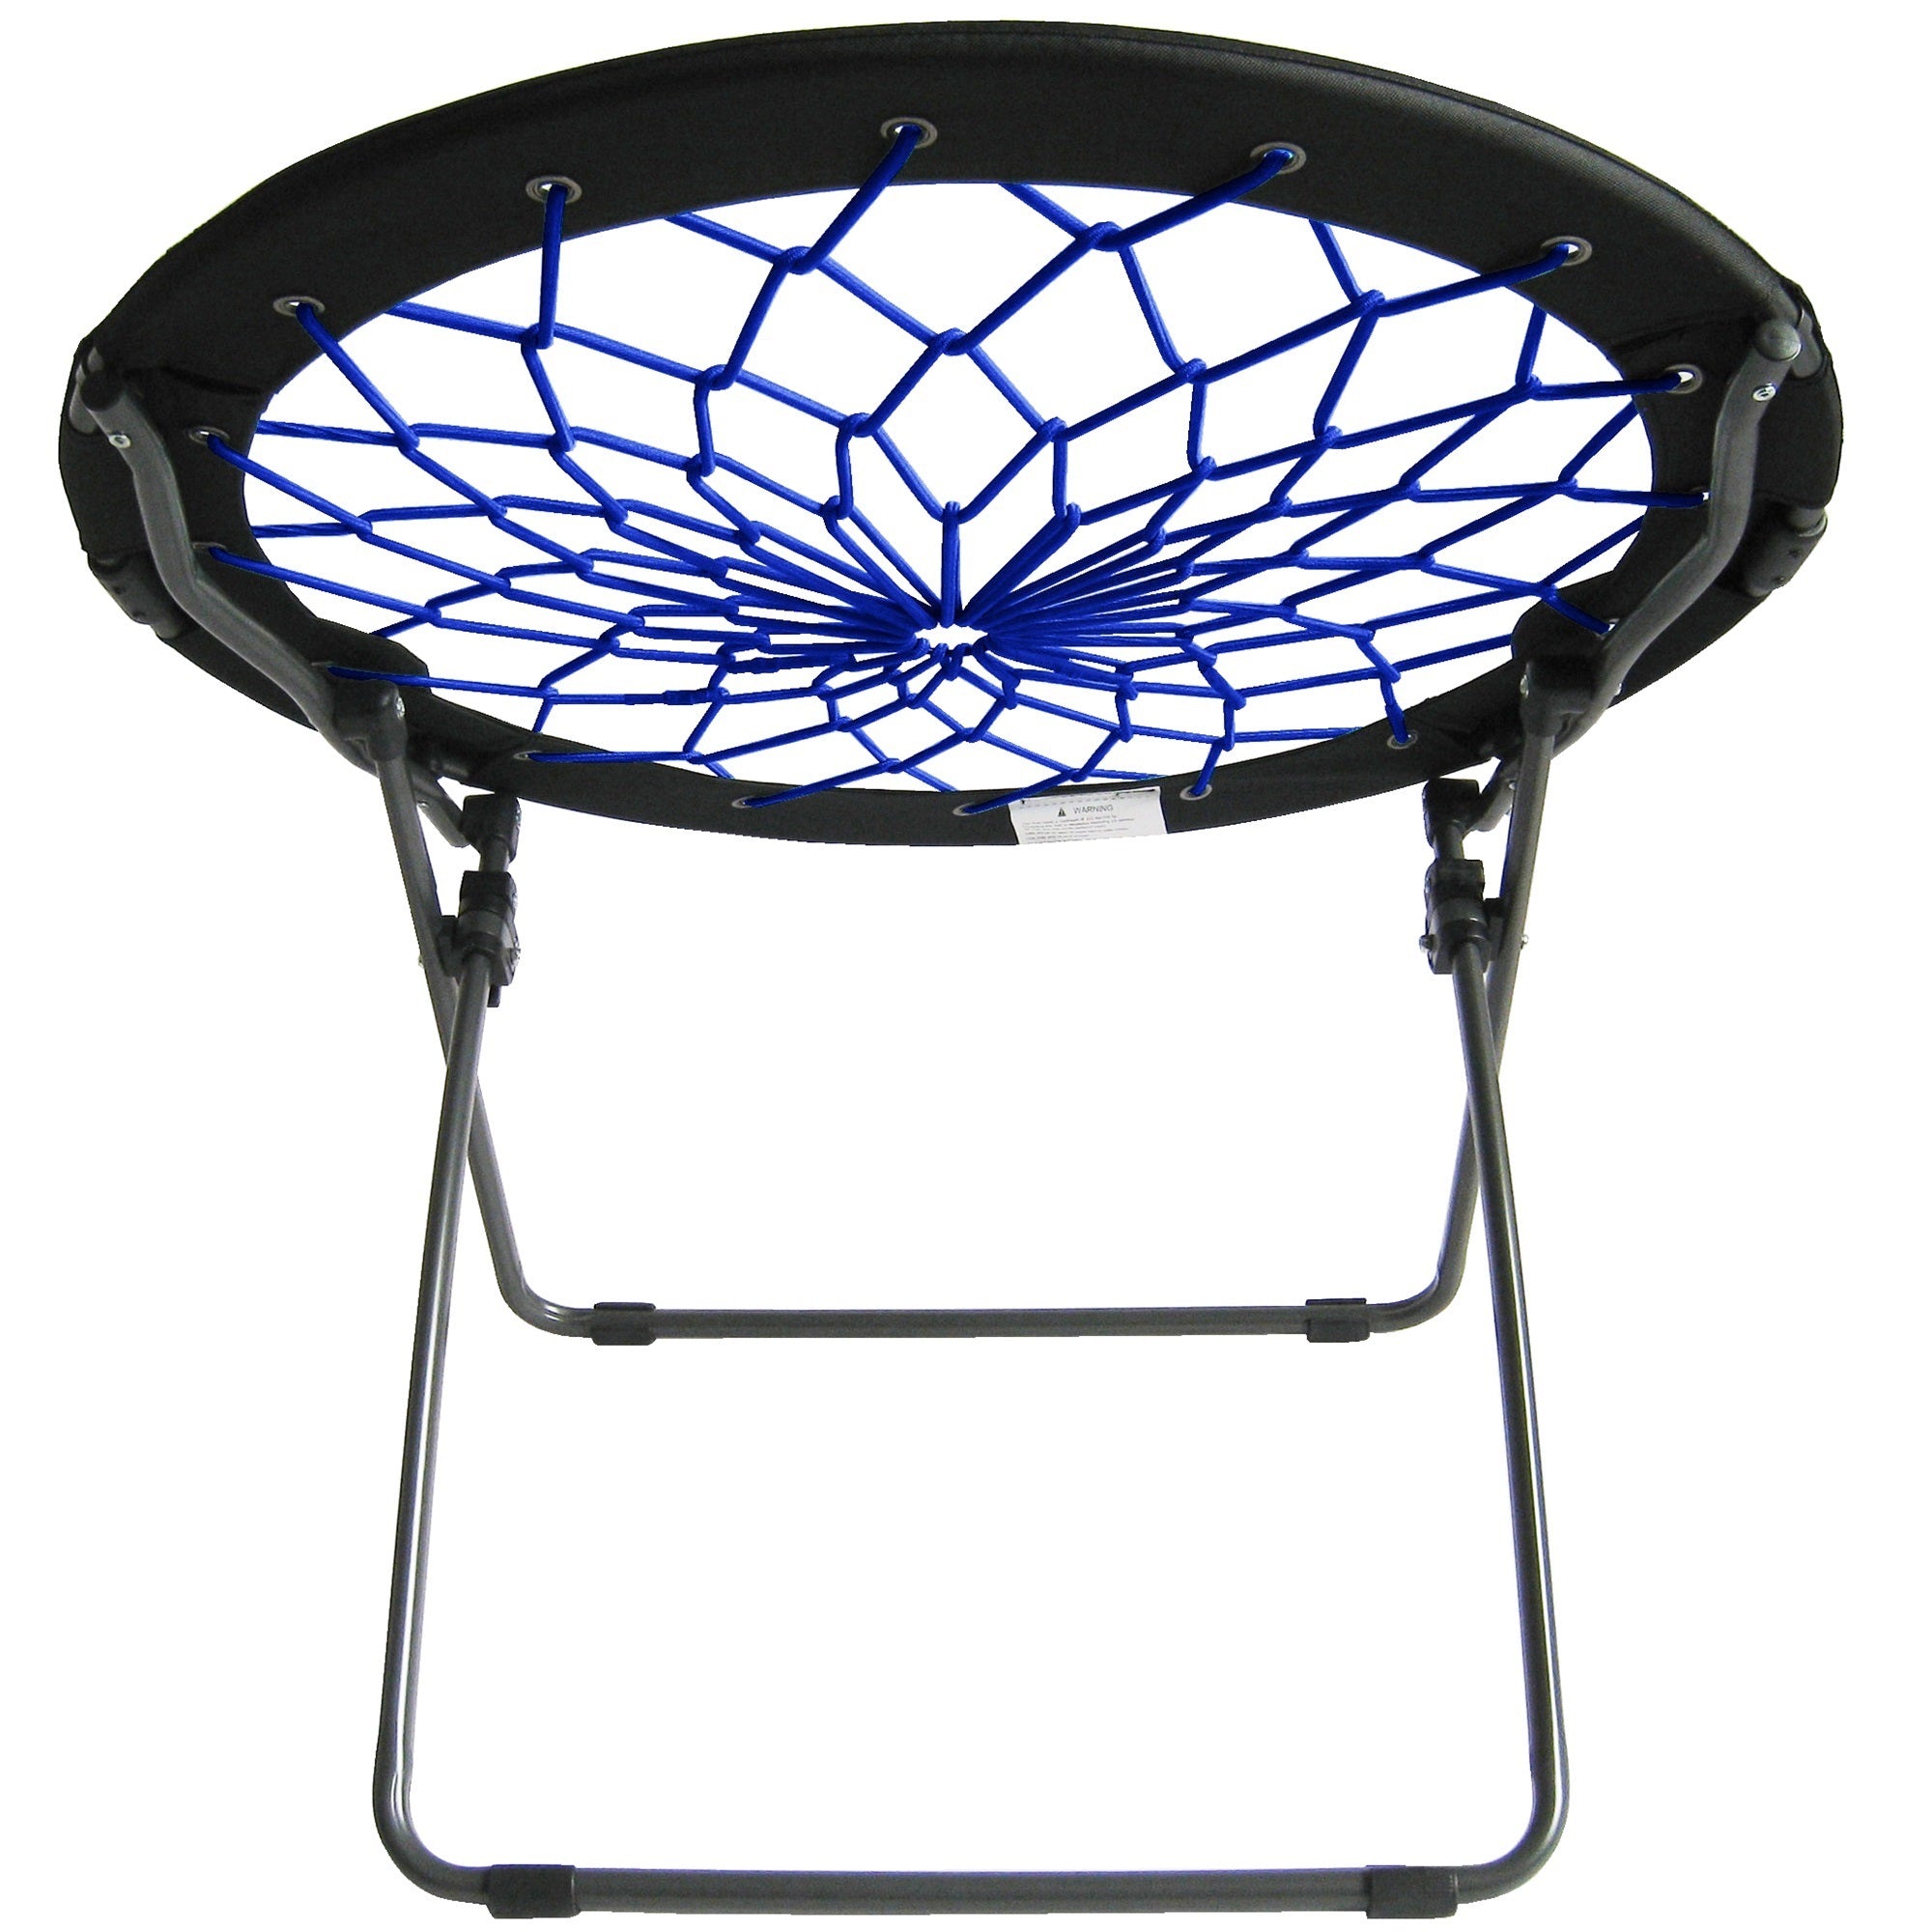 Zenithen Limited Bungee Folding Dish Chairs, Indigo (Pack of 1)